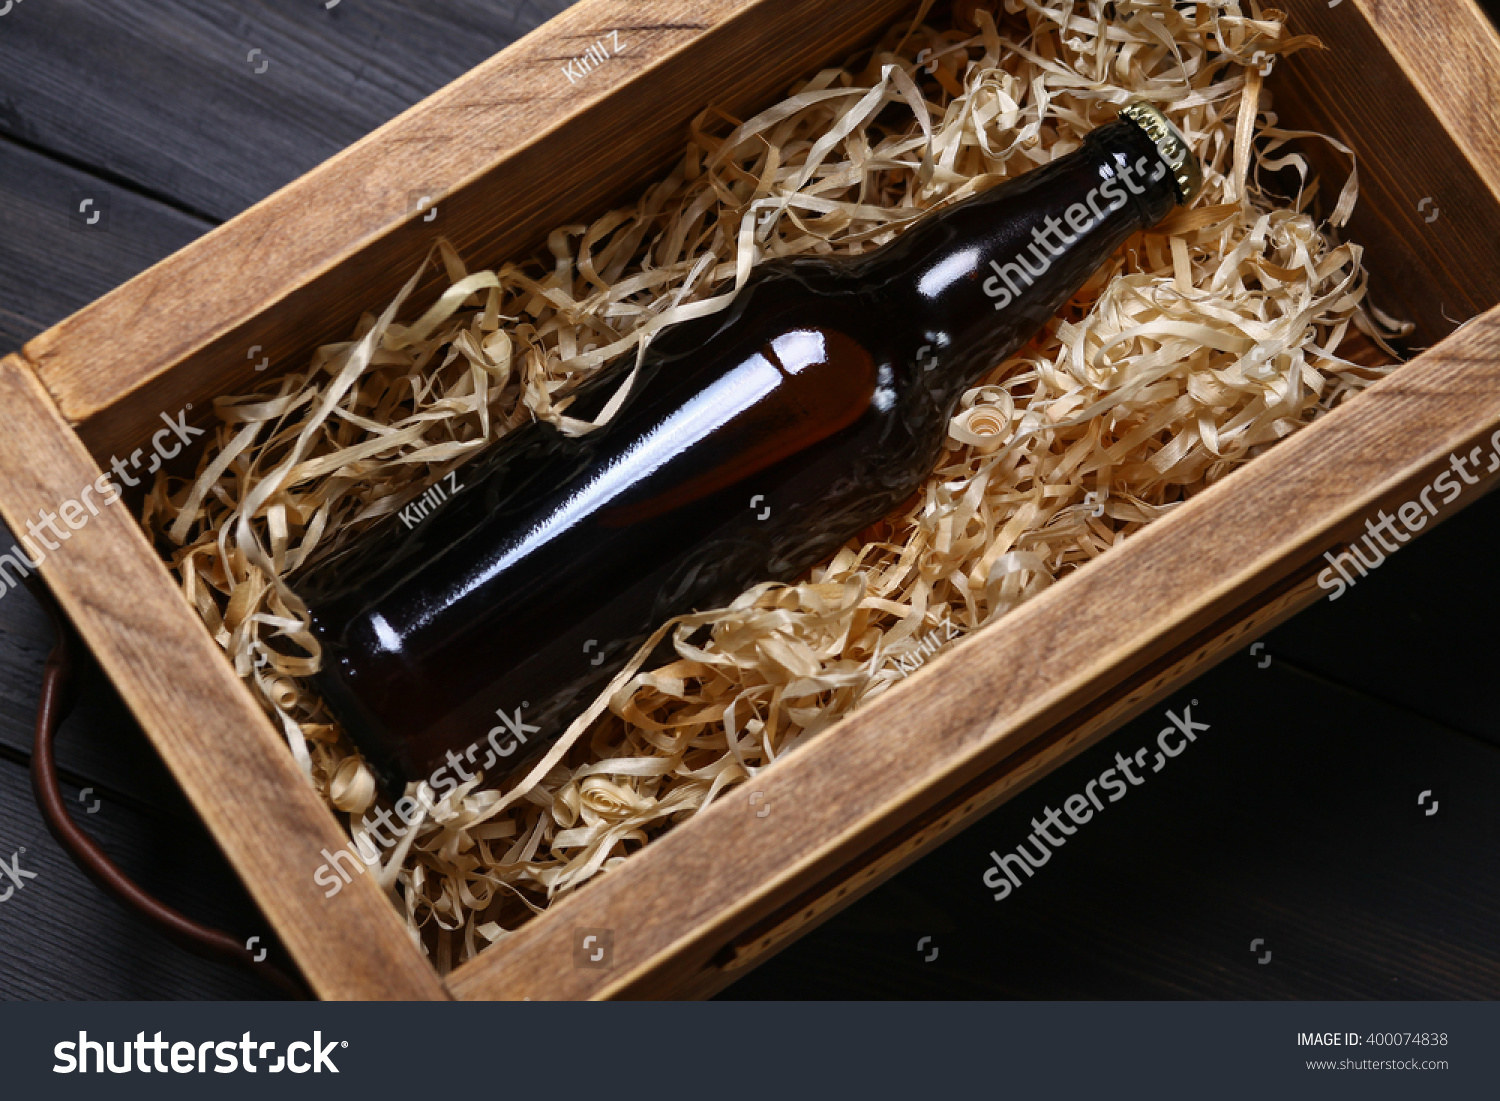 Bottle of beer in a wooden crate with wood shavings on a dark wooden surface #400074838